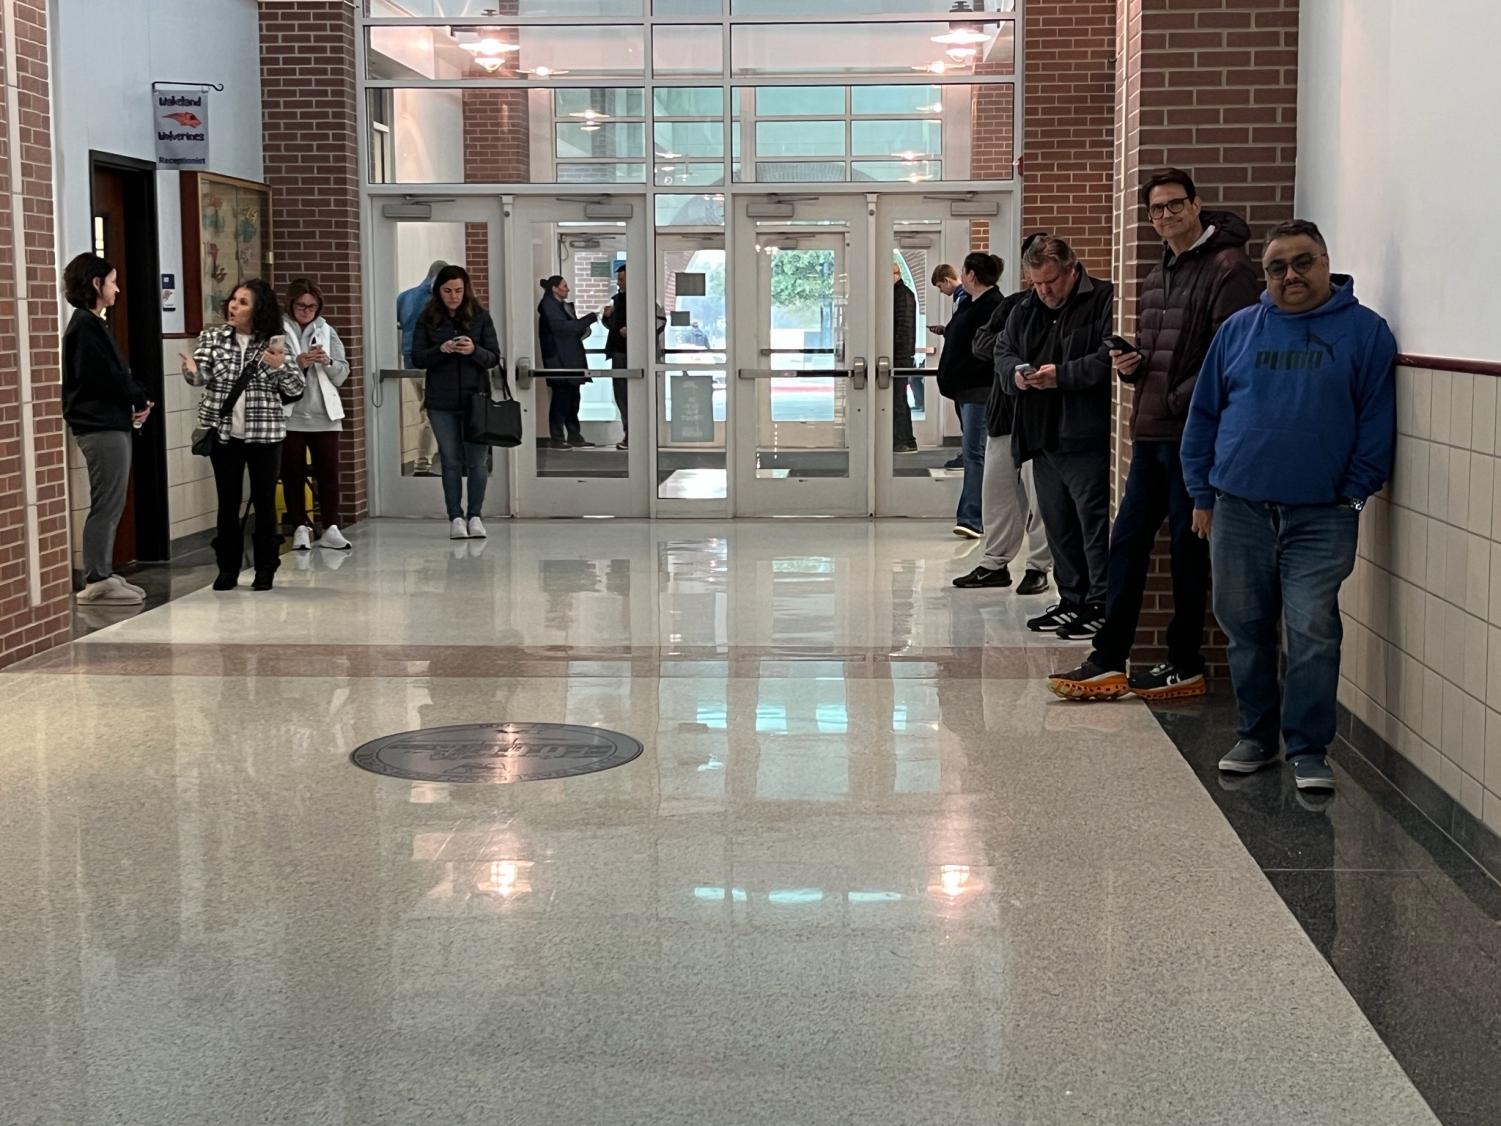 Parents file into the front of the school and wait to pick up their student(s) amidst this afternoon’s winter weather.